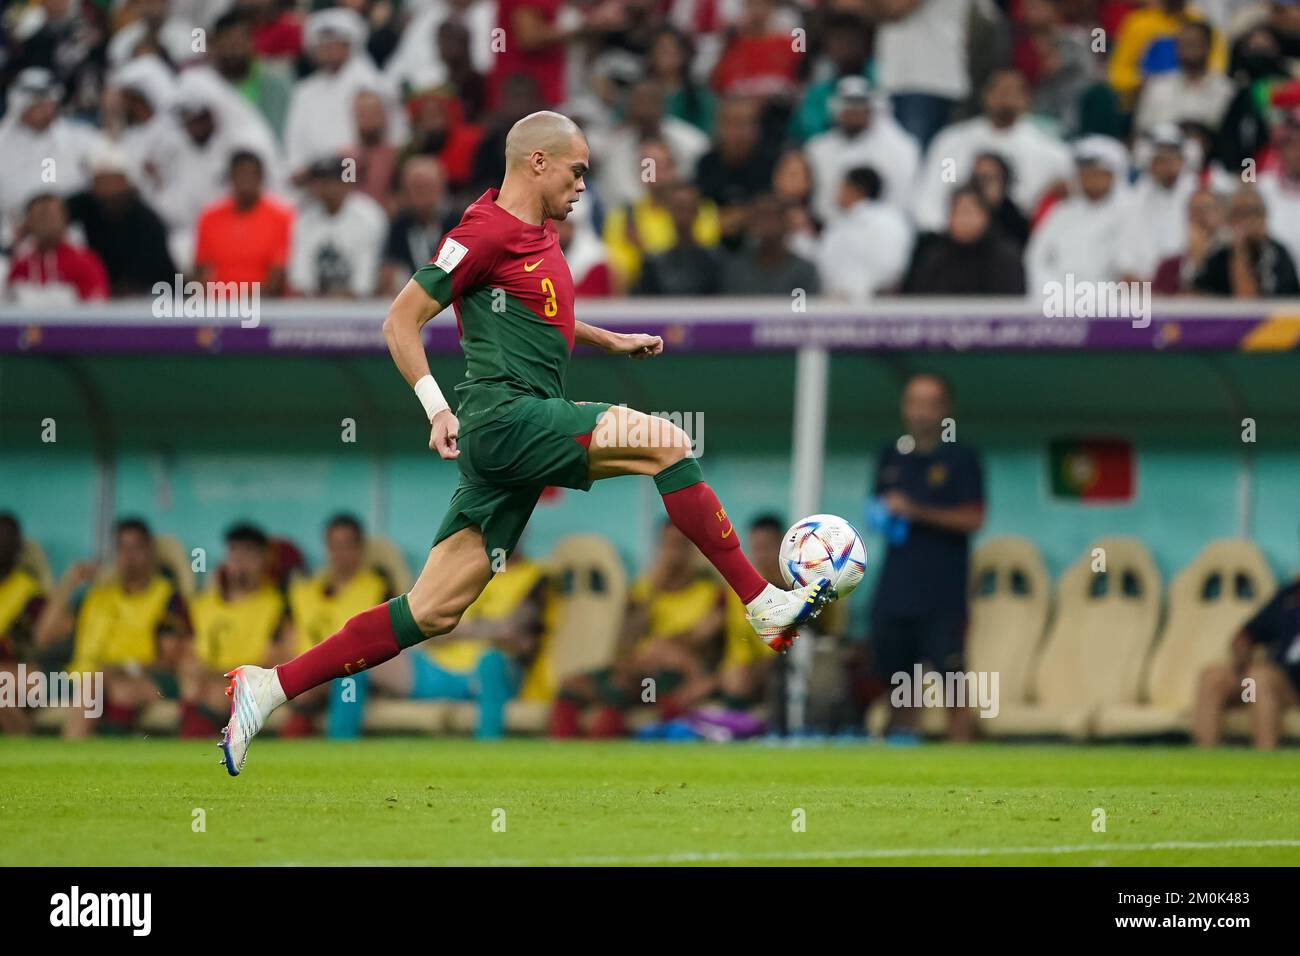 LUSAIL, QATAR - DECEMBER 6: Player of Portugal Pepe controls the ball during the FIFA World Cup Qatar 2022 Round of 16 match between Portugal and Switzerland at Lusail Stadium on December 6, 2022 in Lusail, Qatar. (Photo by Florencia Tan Jun/PxImages) Stock Photo